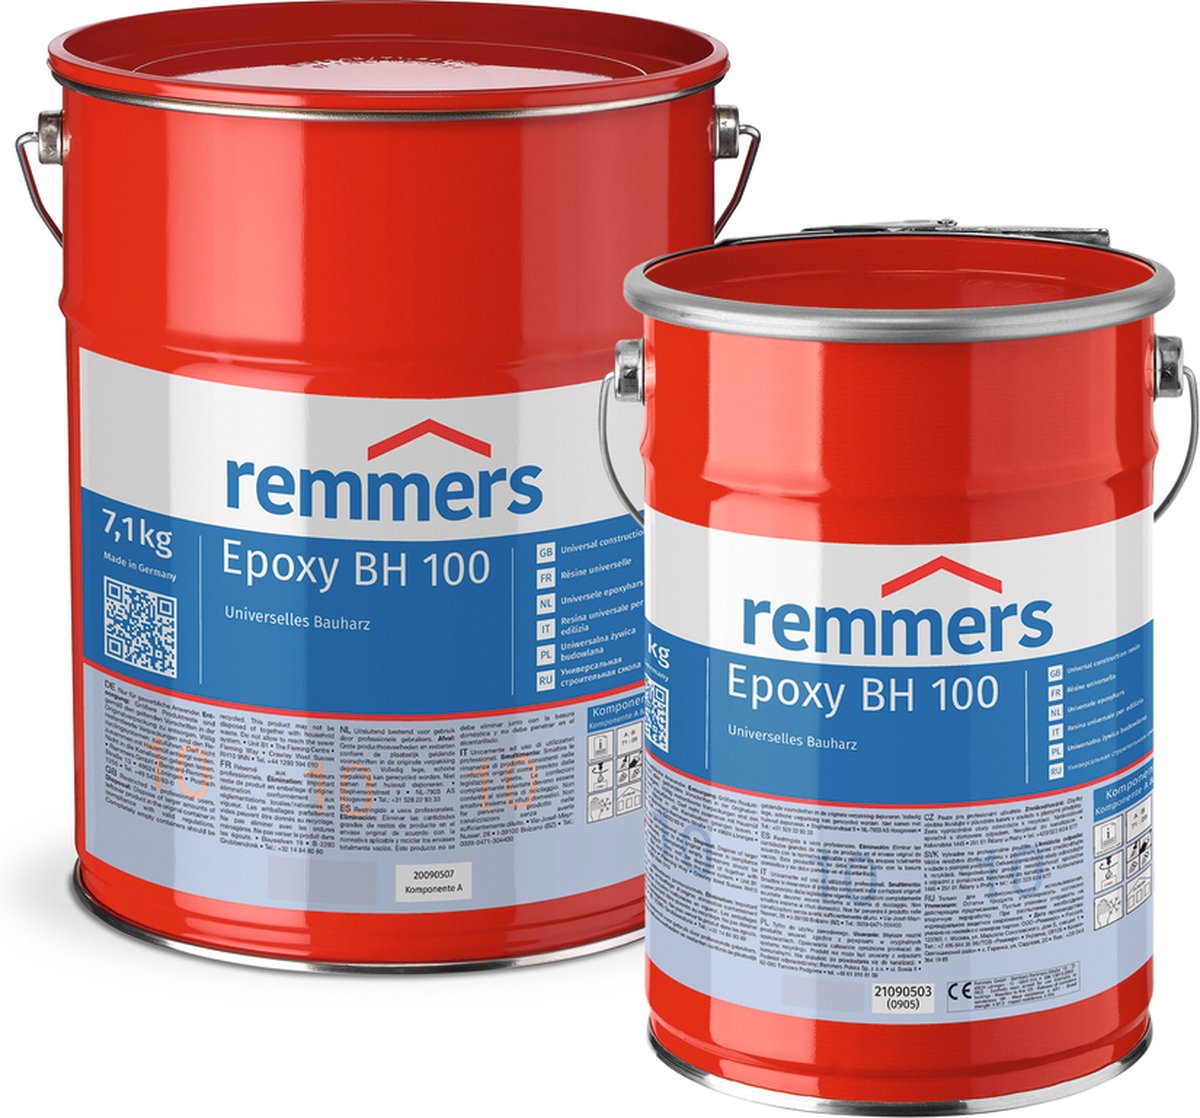 Remmers Epoxy BH 100 5 kg